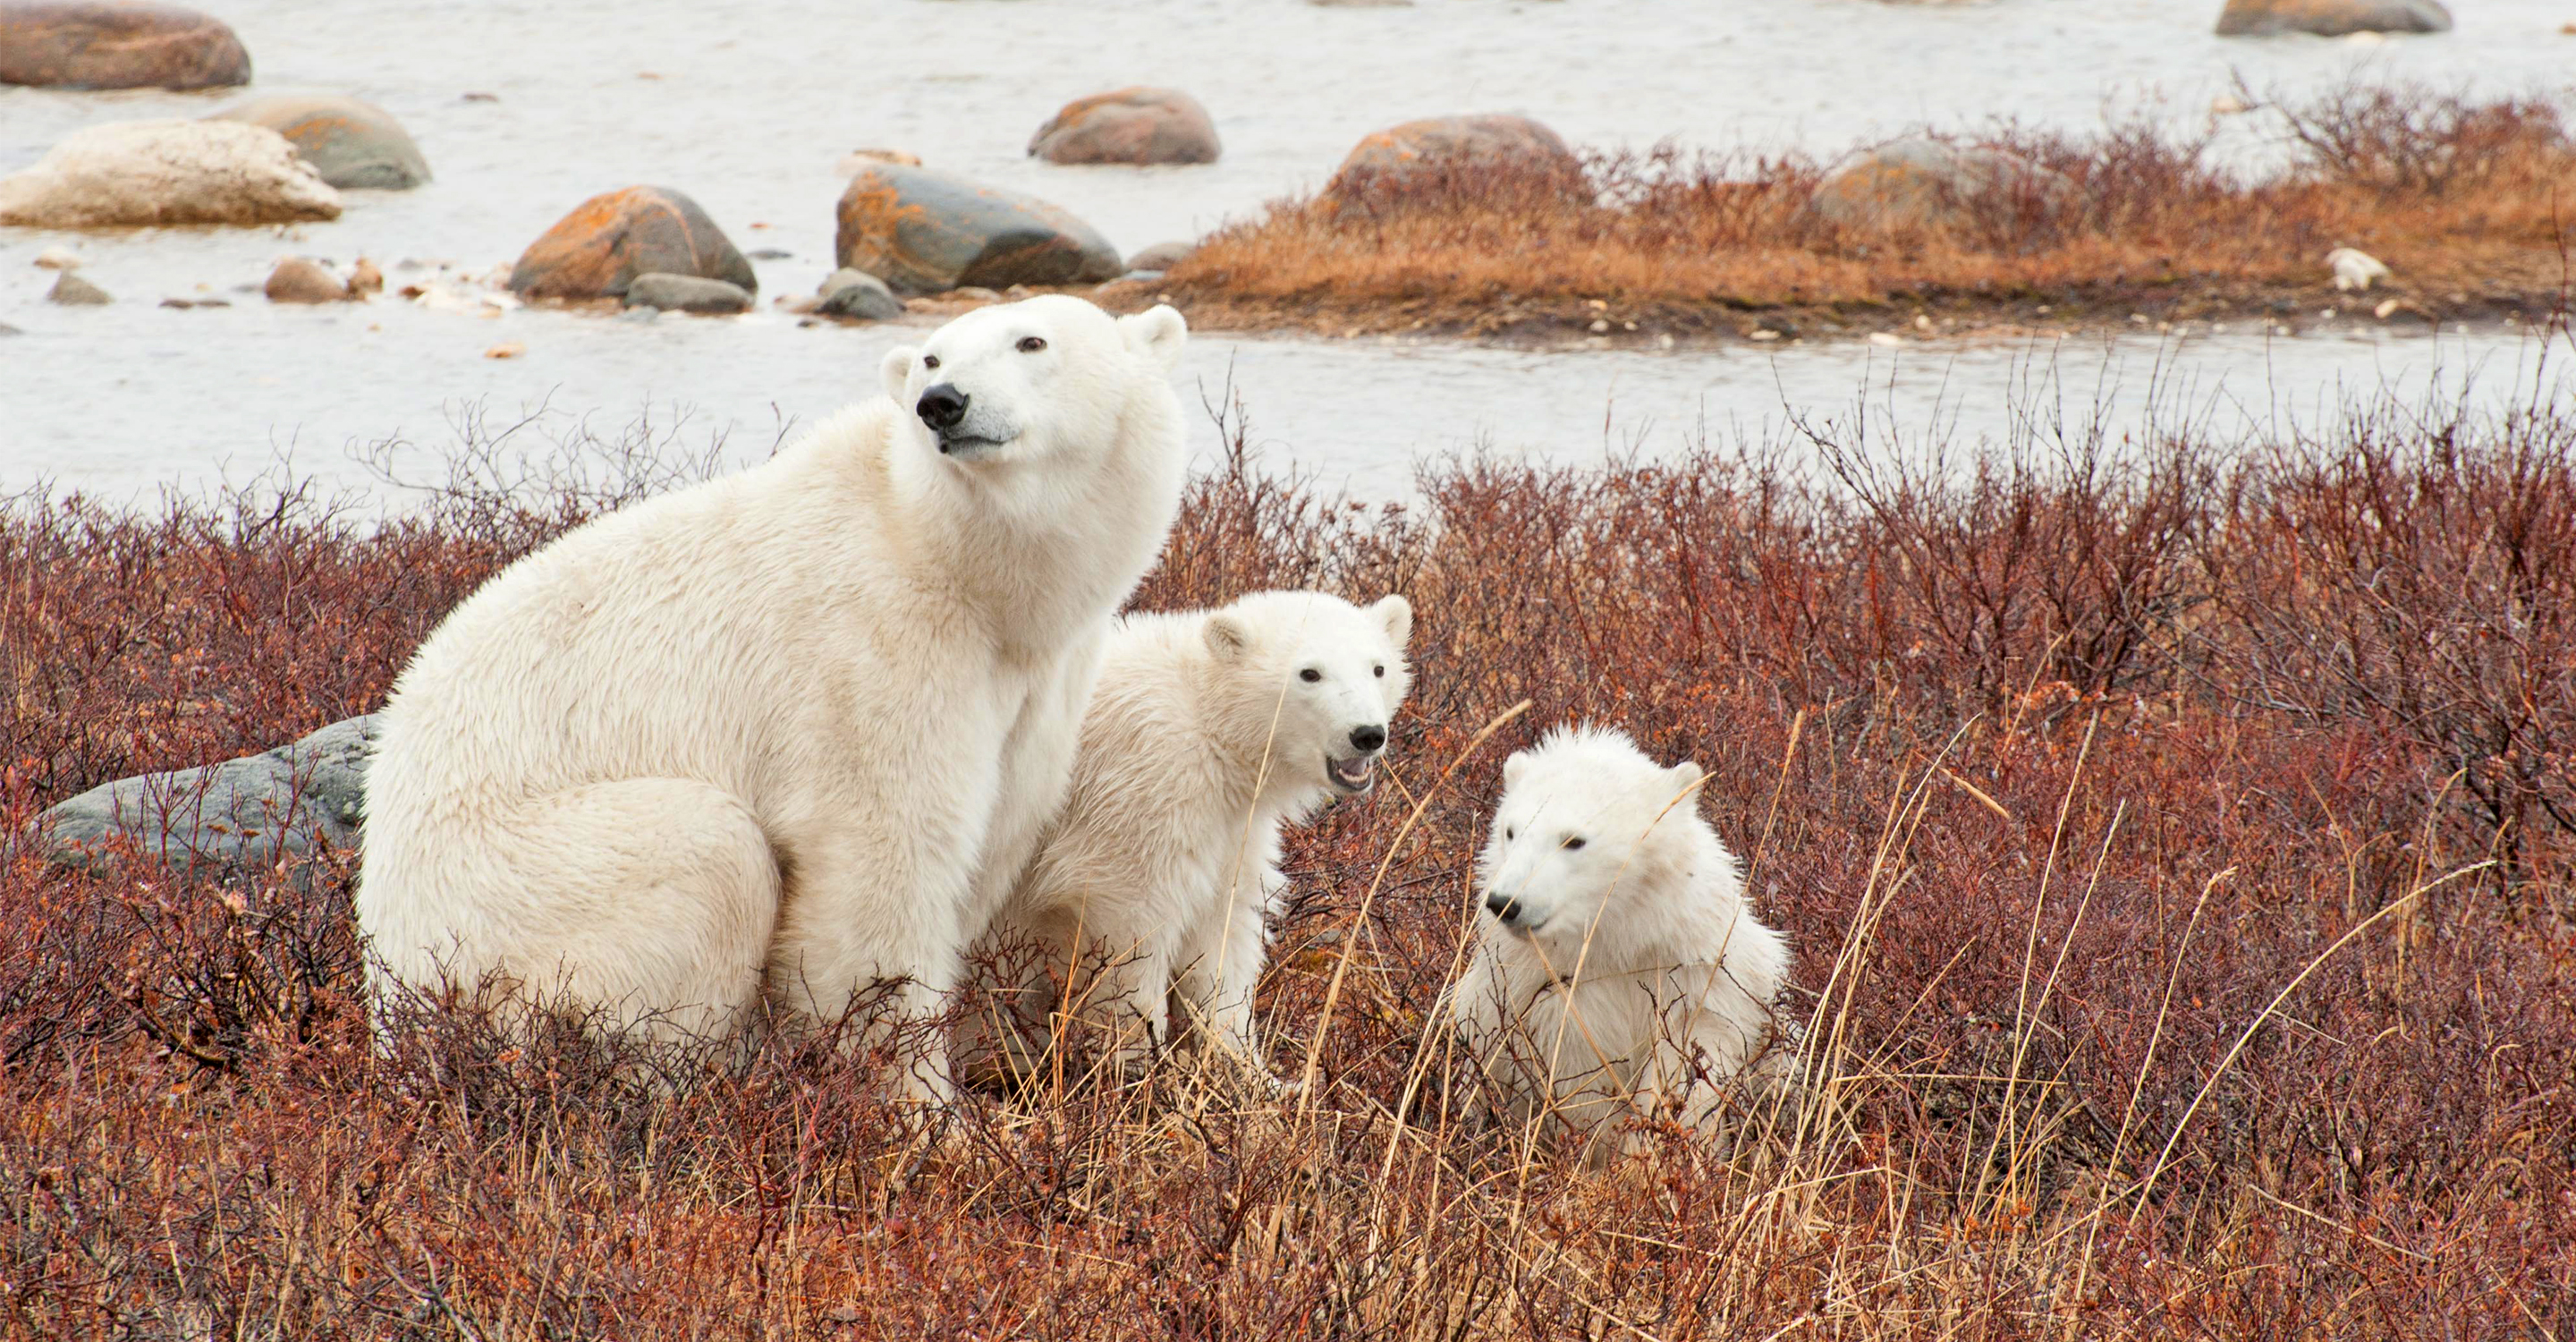 A polar bear mother and her two cubs sit among the red bushes of the tundra, Churchill, Manitoba, Canada